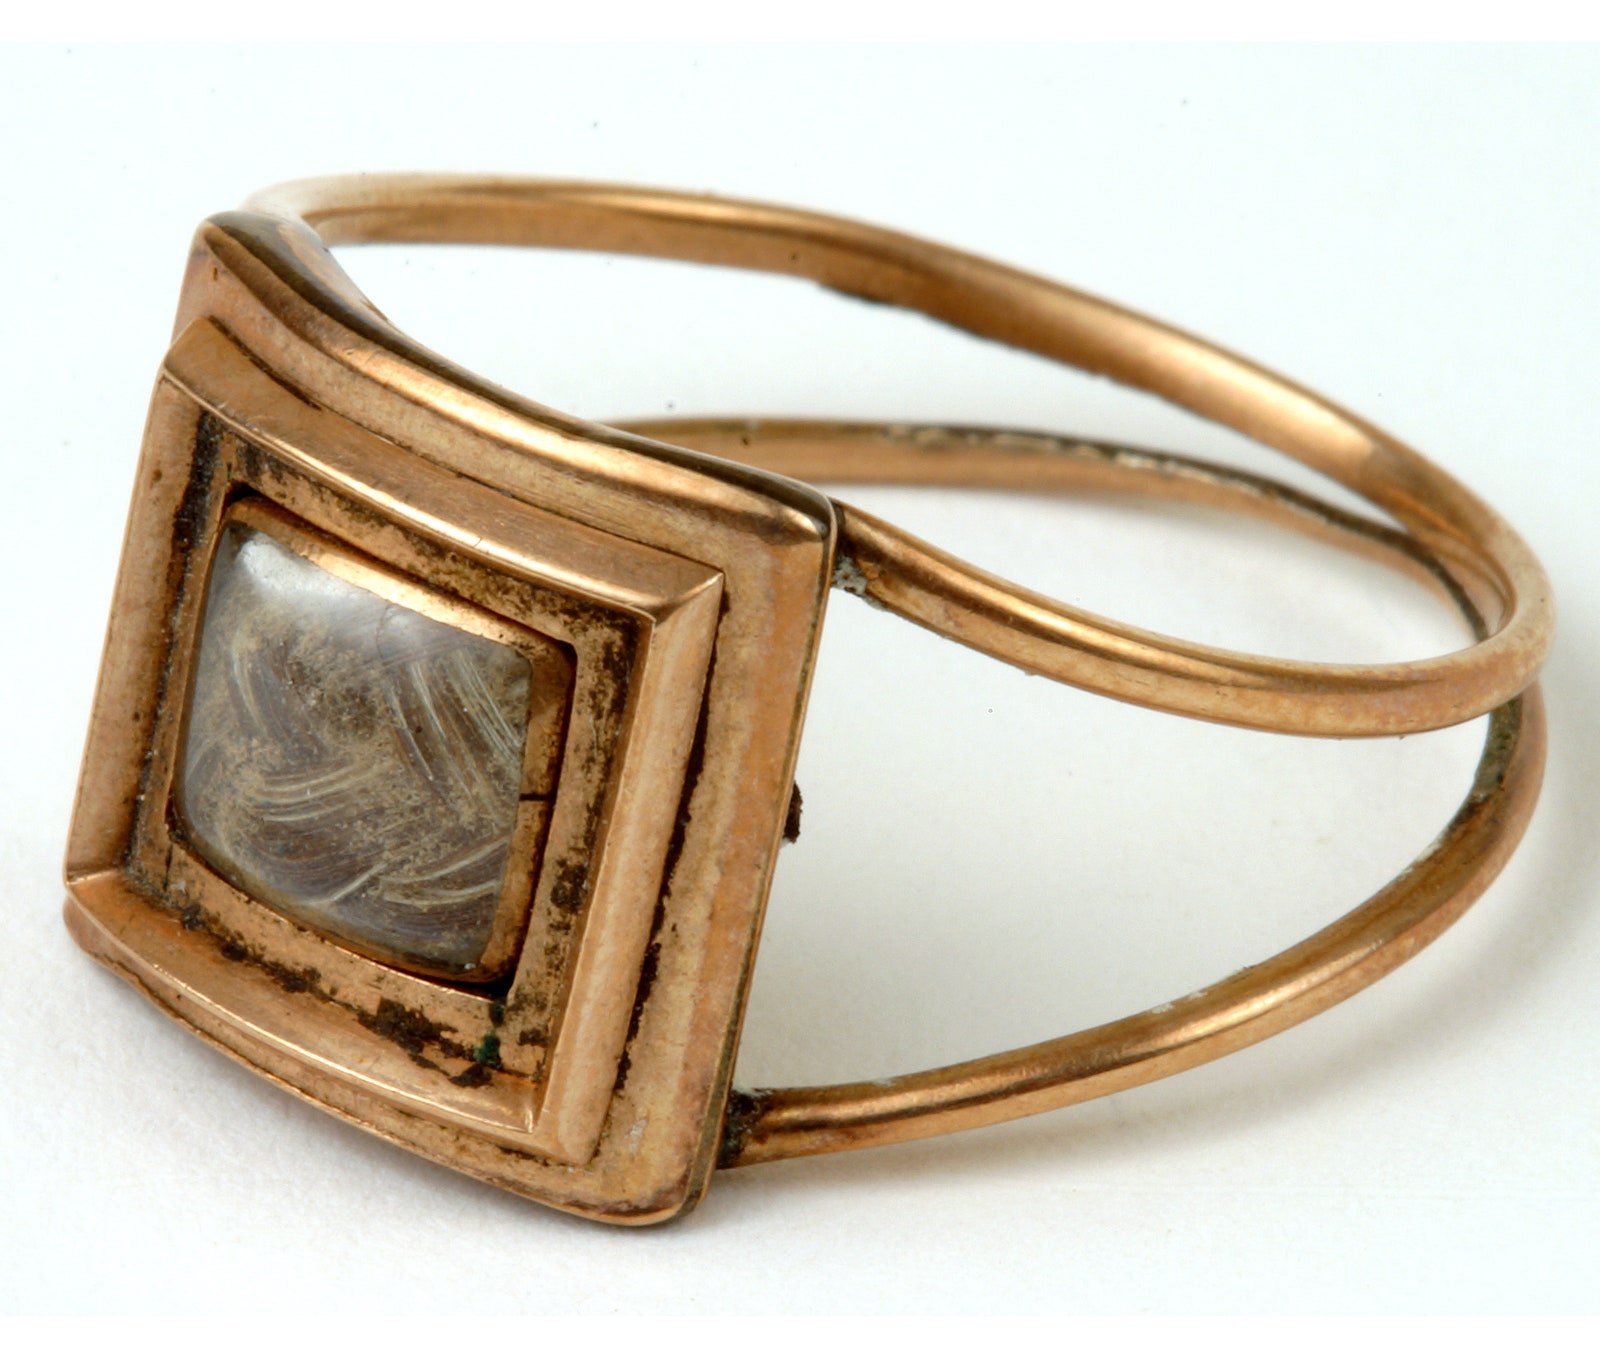 photo of a brass mourning ring that contains alexander hamilton's hair 1805